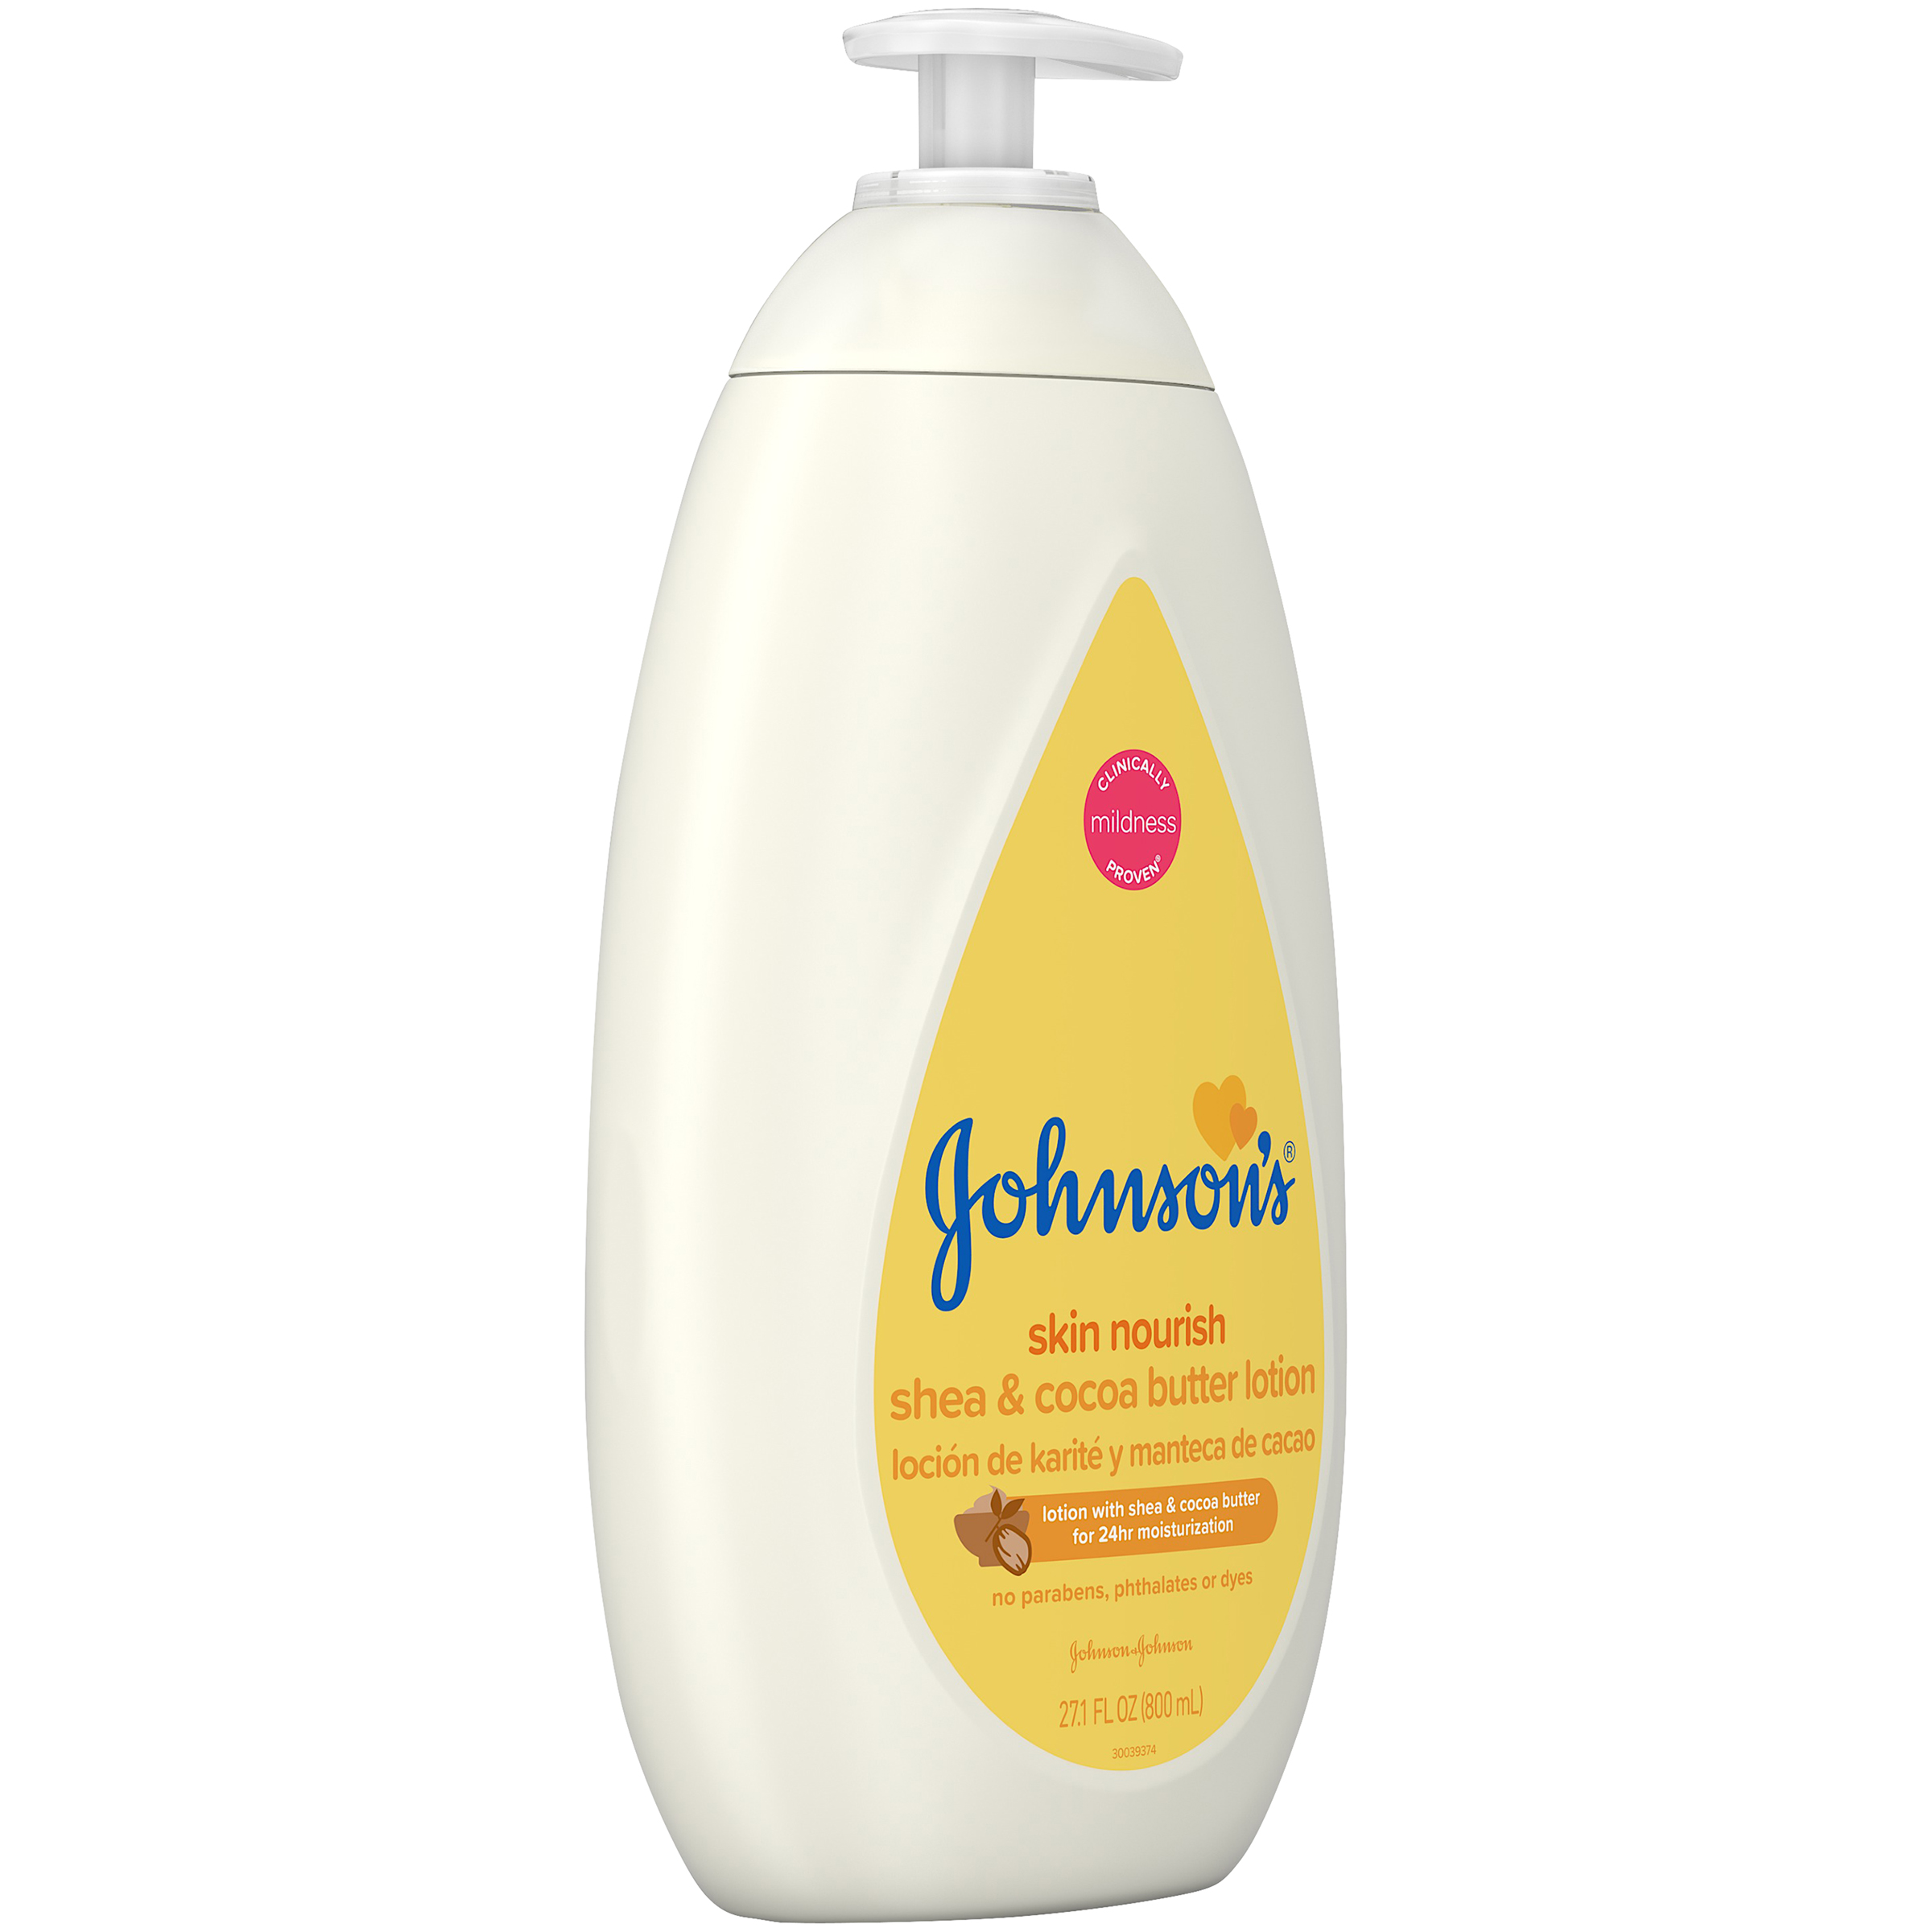 Johnson & Johnson Johnson's Dry Skin Baby Lotion with Shea & Cocoa Butter, 27.1 fl. oz